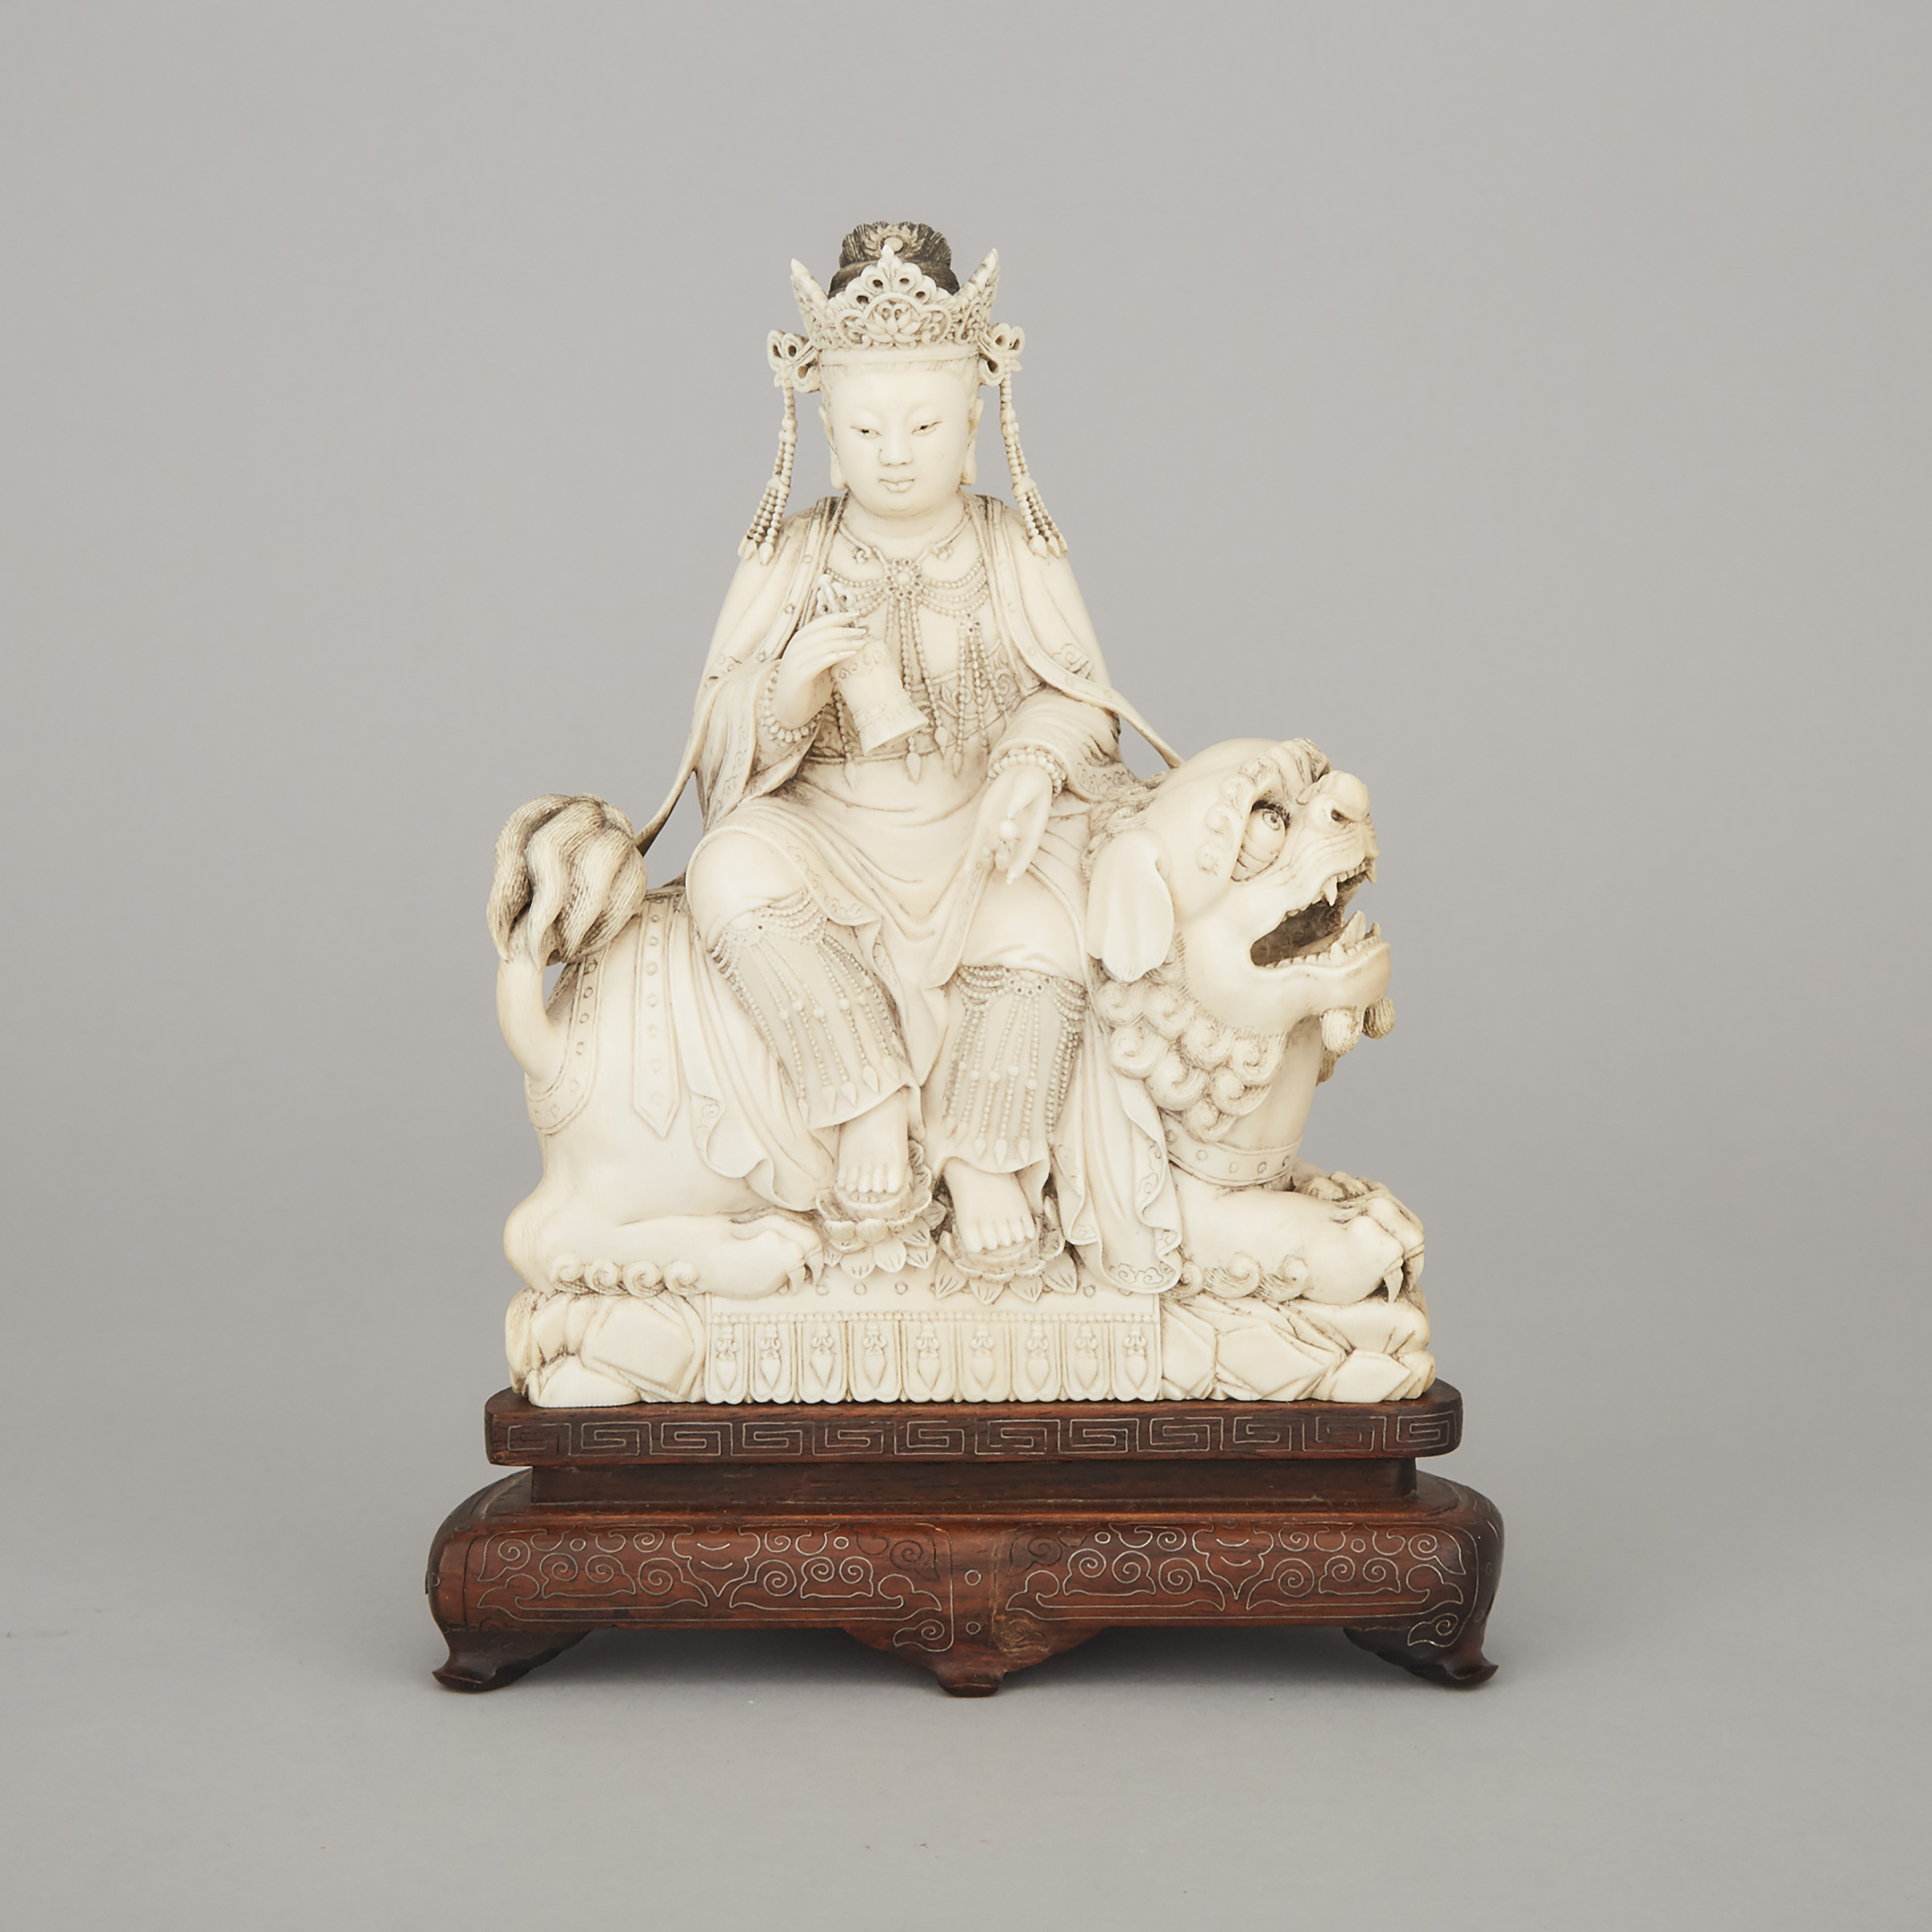 A Finely Carved Ivory Figure of Manjushri Seated on a Lion, Early 20th Century